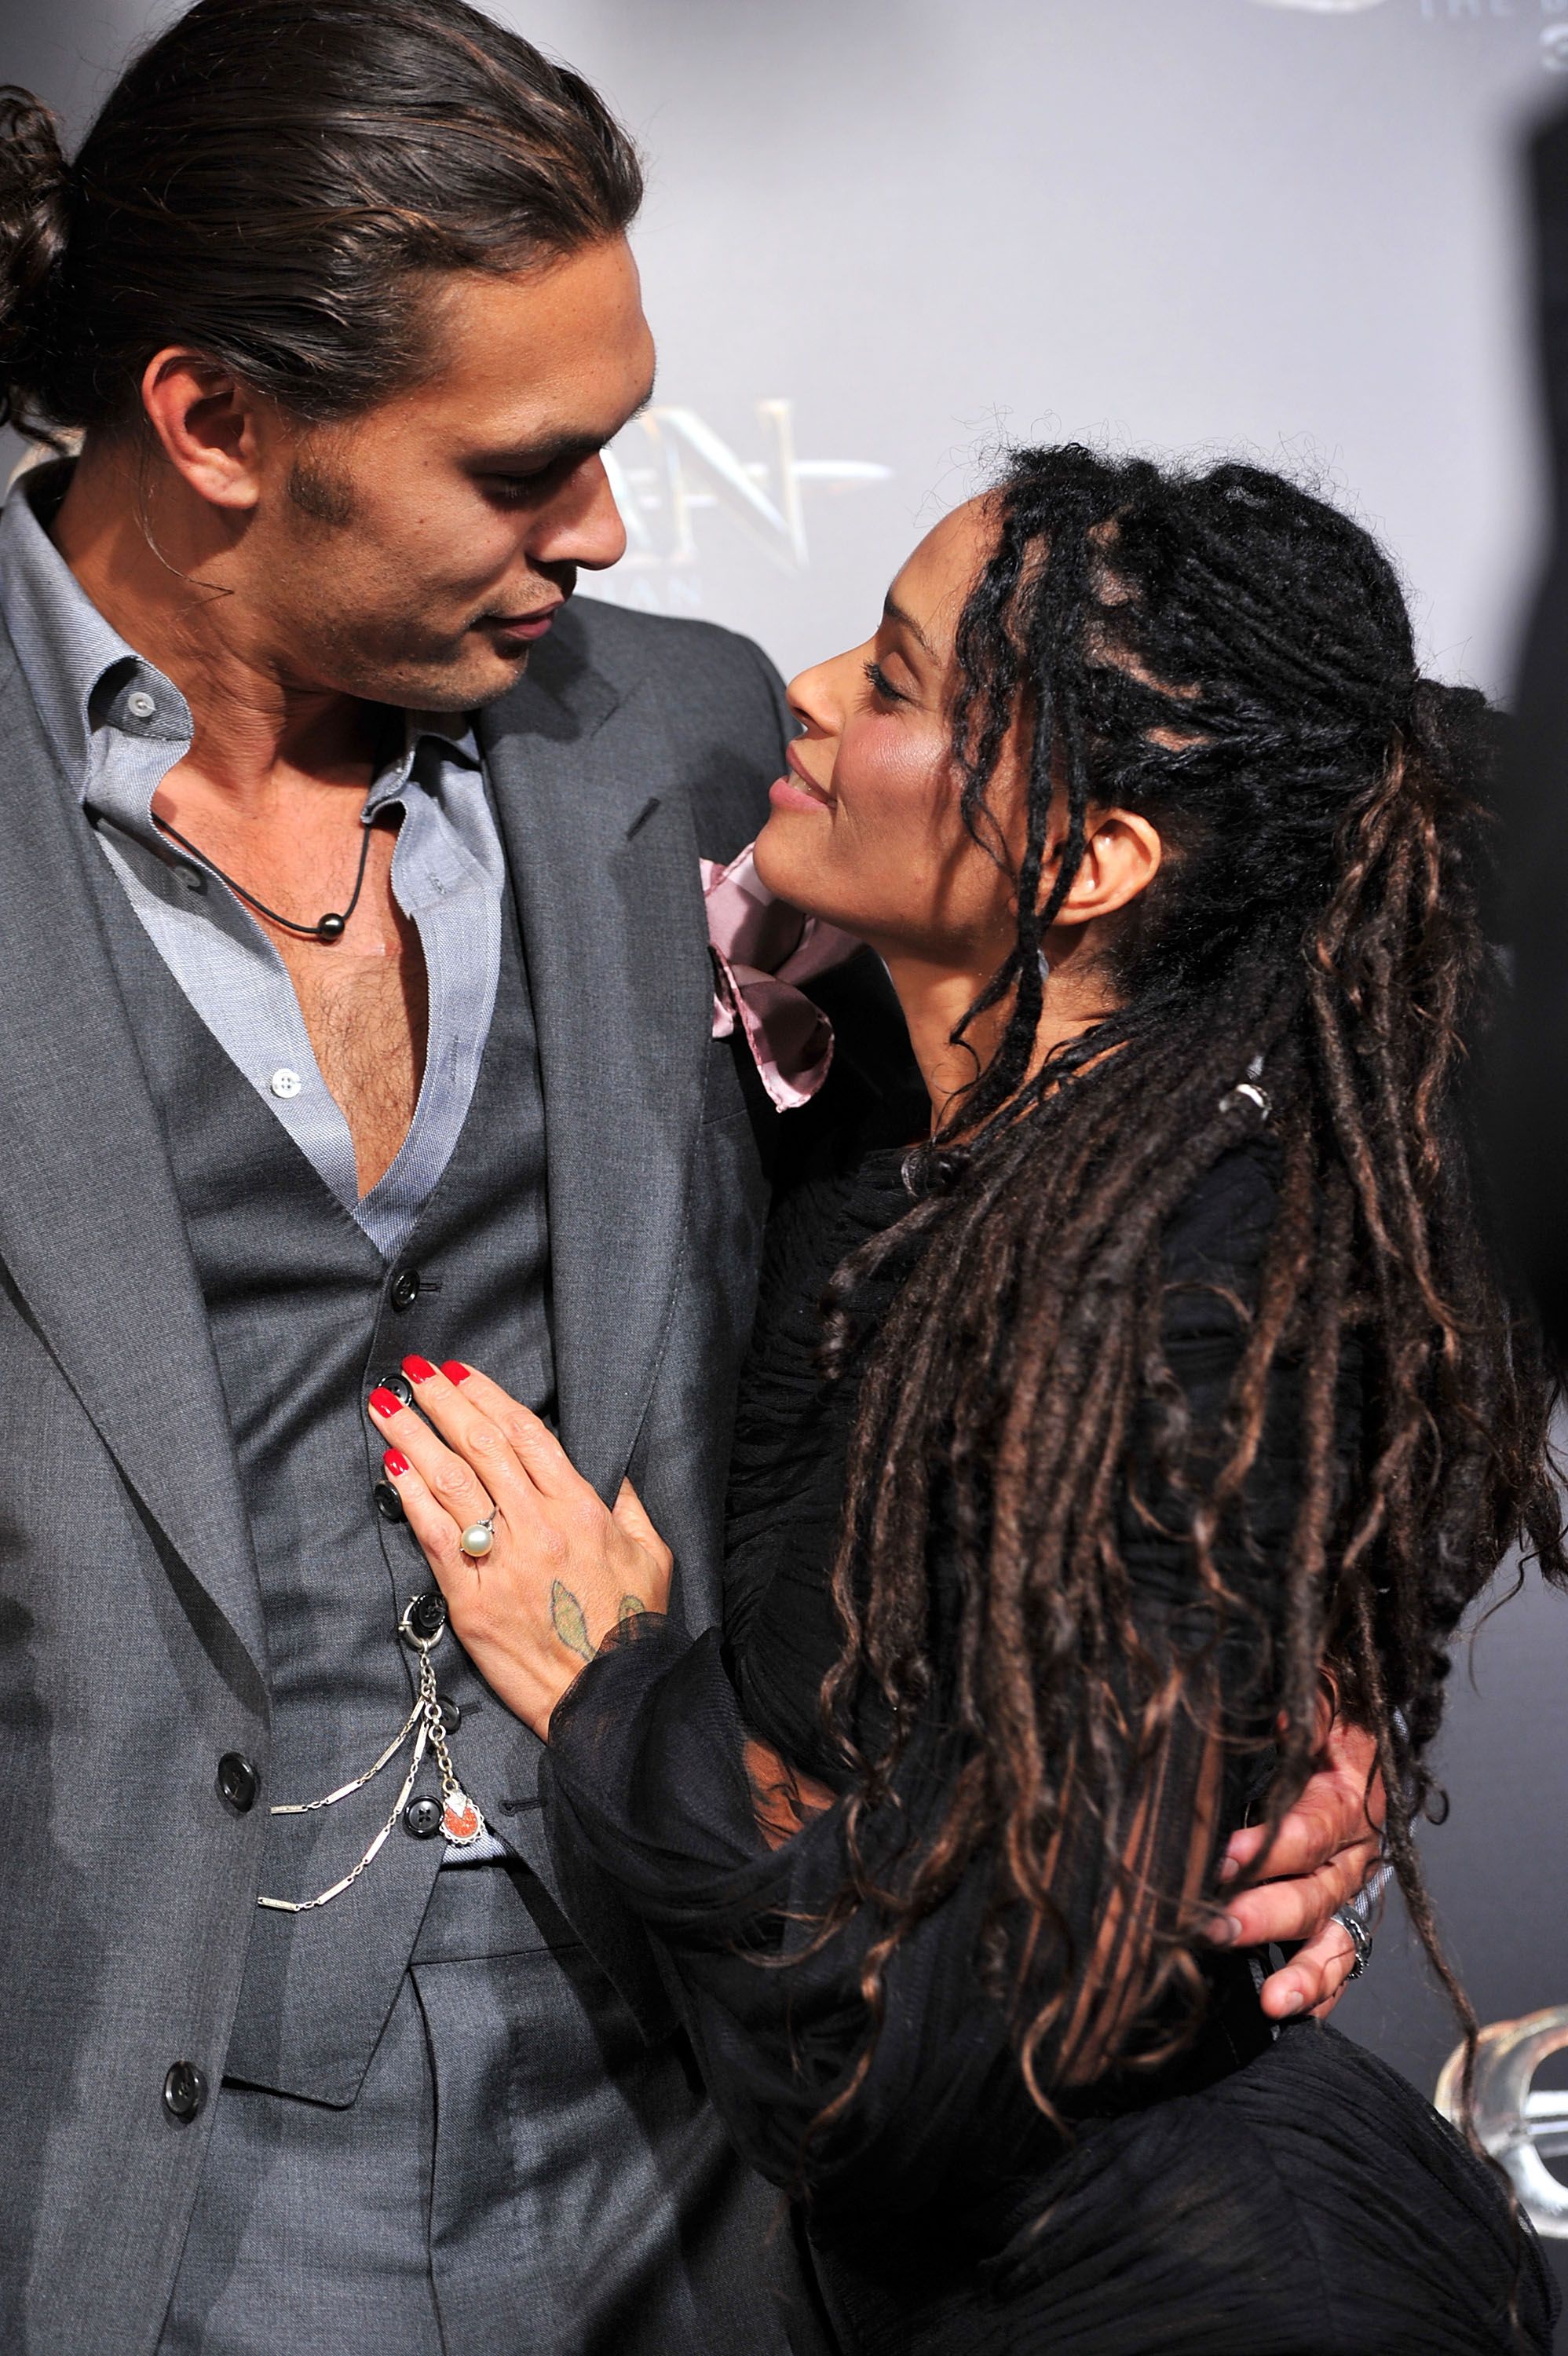 Jason Momoa and Lisa Bonet at the premiere of "Conan The Barbarian" on August 11, 2011, in Los Angeles, California | Photo: Alberto E. Rodriguez/Getty Images